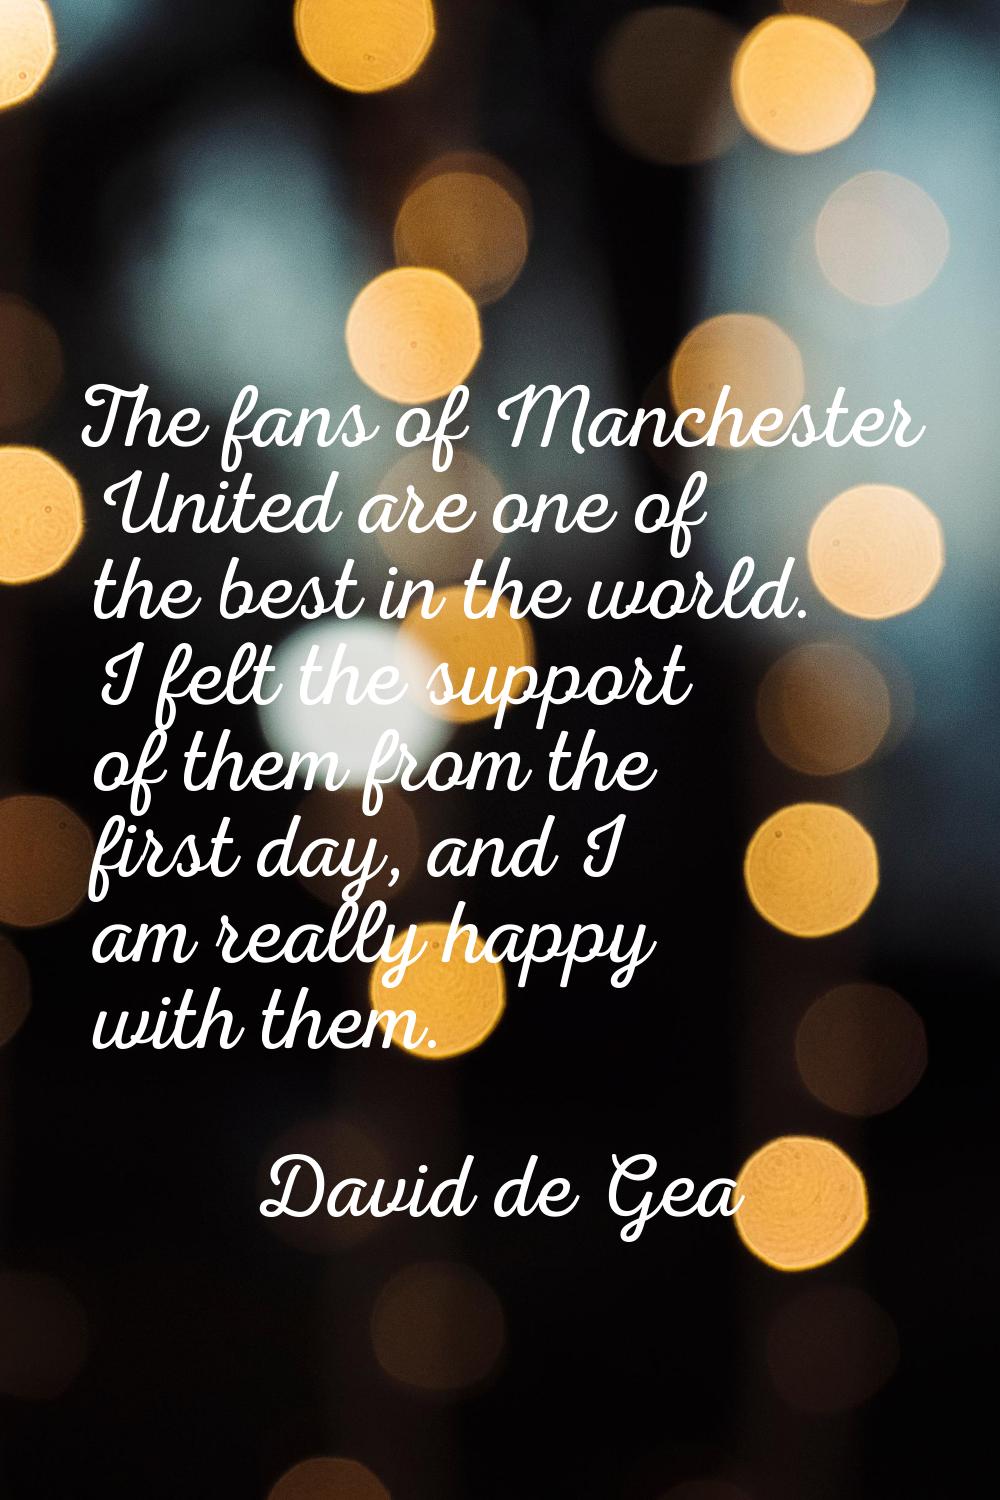 The fans of Manchester United are one of the best in the world. I felt the support of them from the